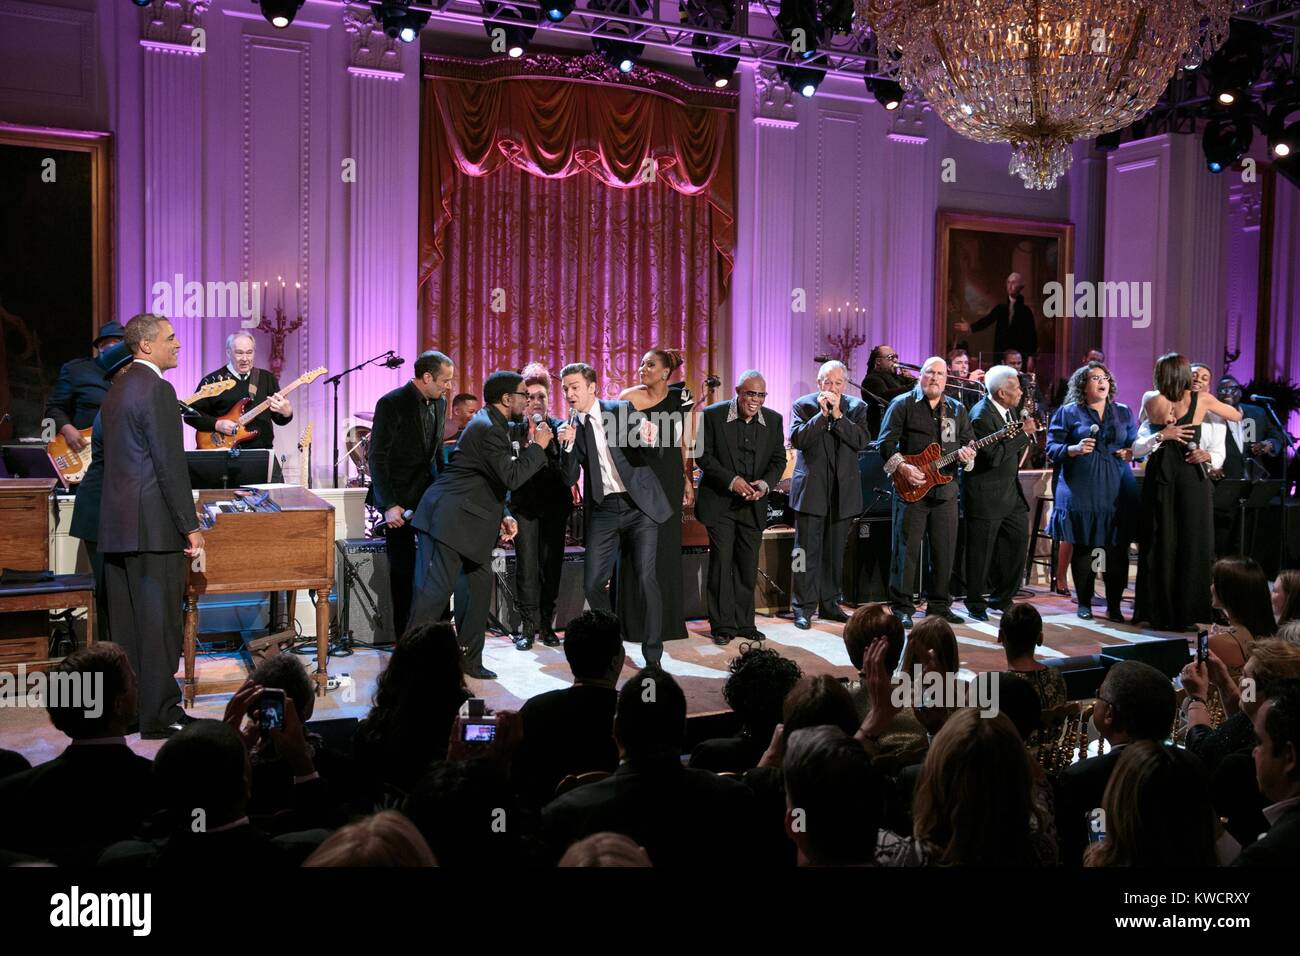 Musicians on stage during the finale of the 'In Performance at the White House: Memphis Soul'. President Barack Obama and First Lady Michelle Obama thank the performers. The program included performances by Alabama Shakes, William Bell, Steve Cropper, Eddie Floyd, Ben Harper, Queen Latifah, Cyndi Lauper, Joshua Ledet, Sam Moore, Charlie Musselwhite, Mavis Staples, Justin Timberlake, and Booker T. Jones. (BSLOC 2015 3 100) Stock Photo